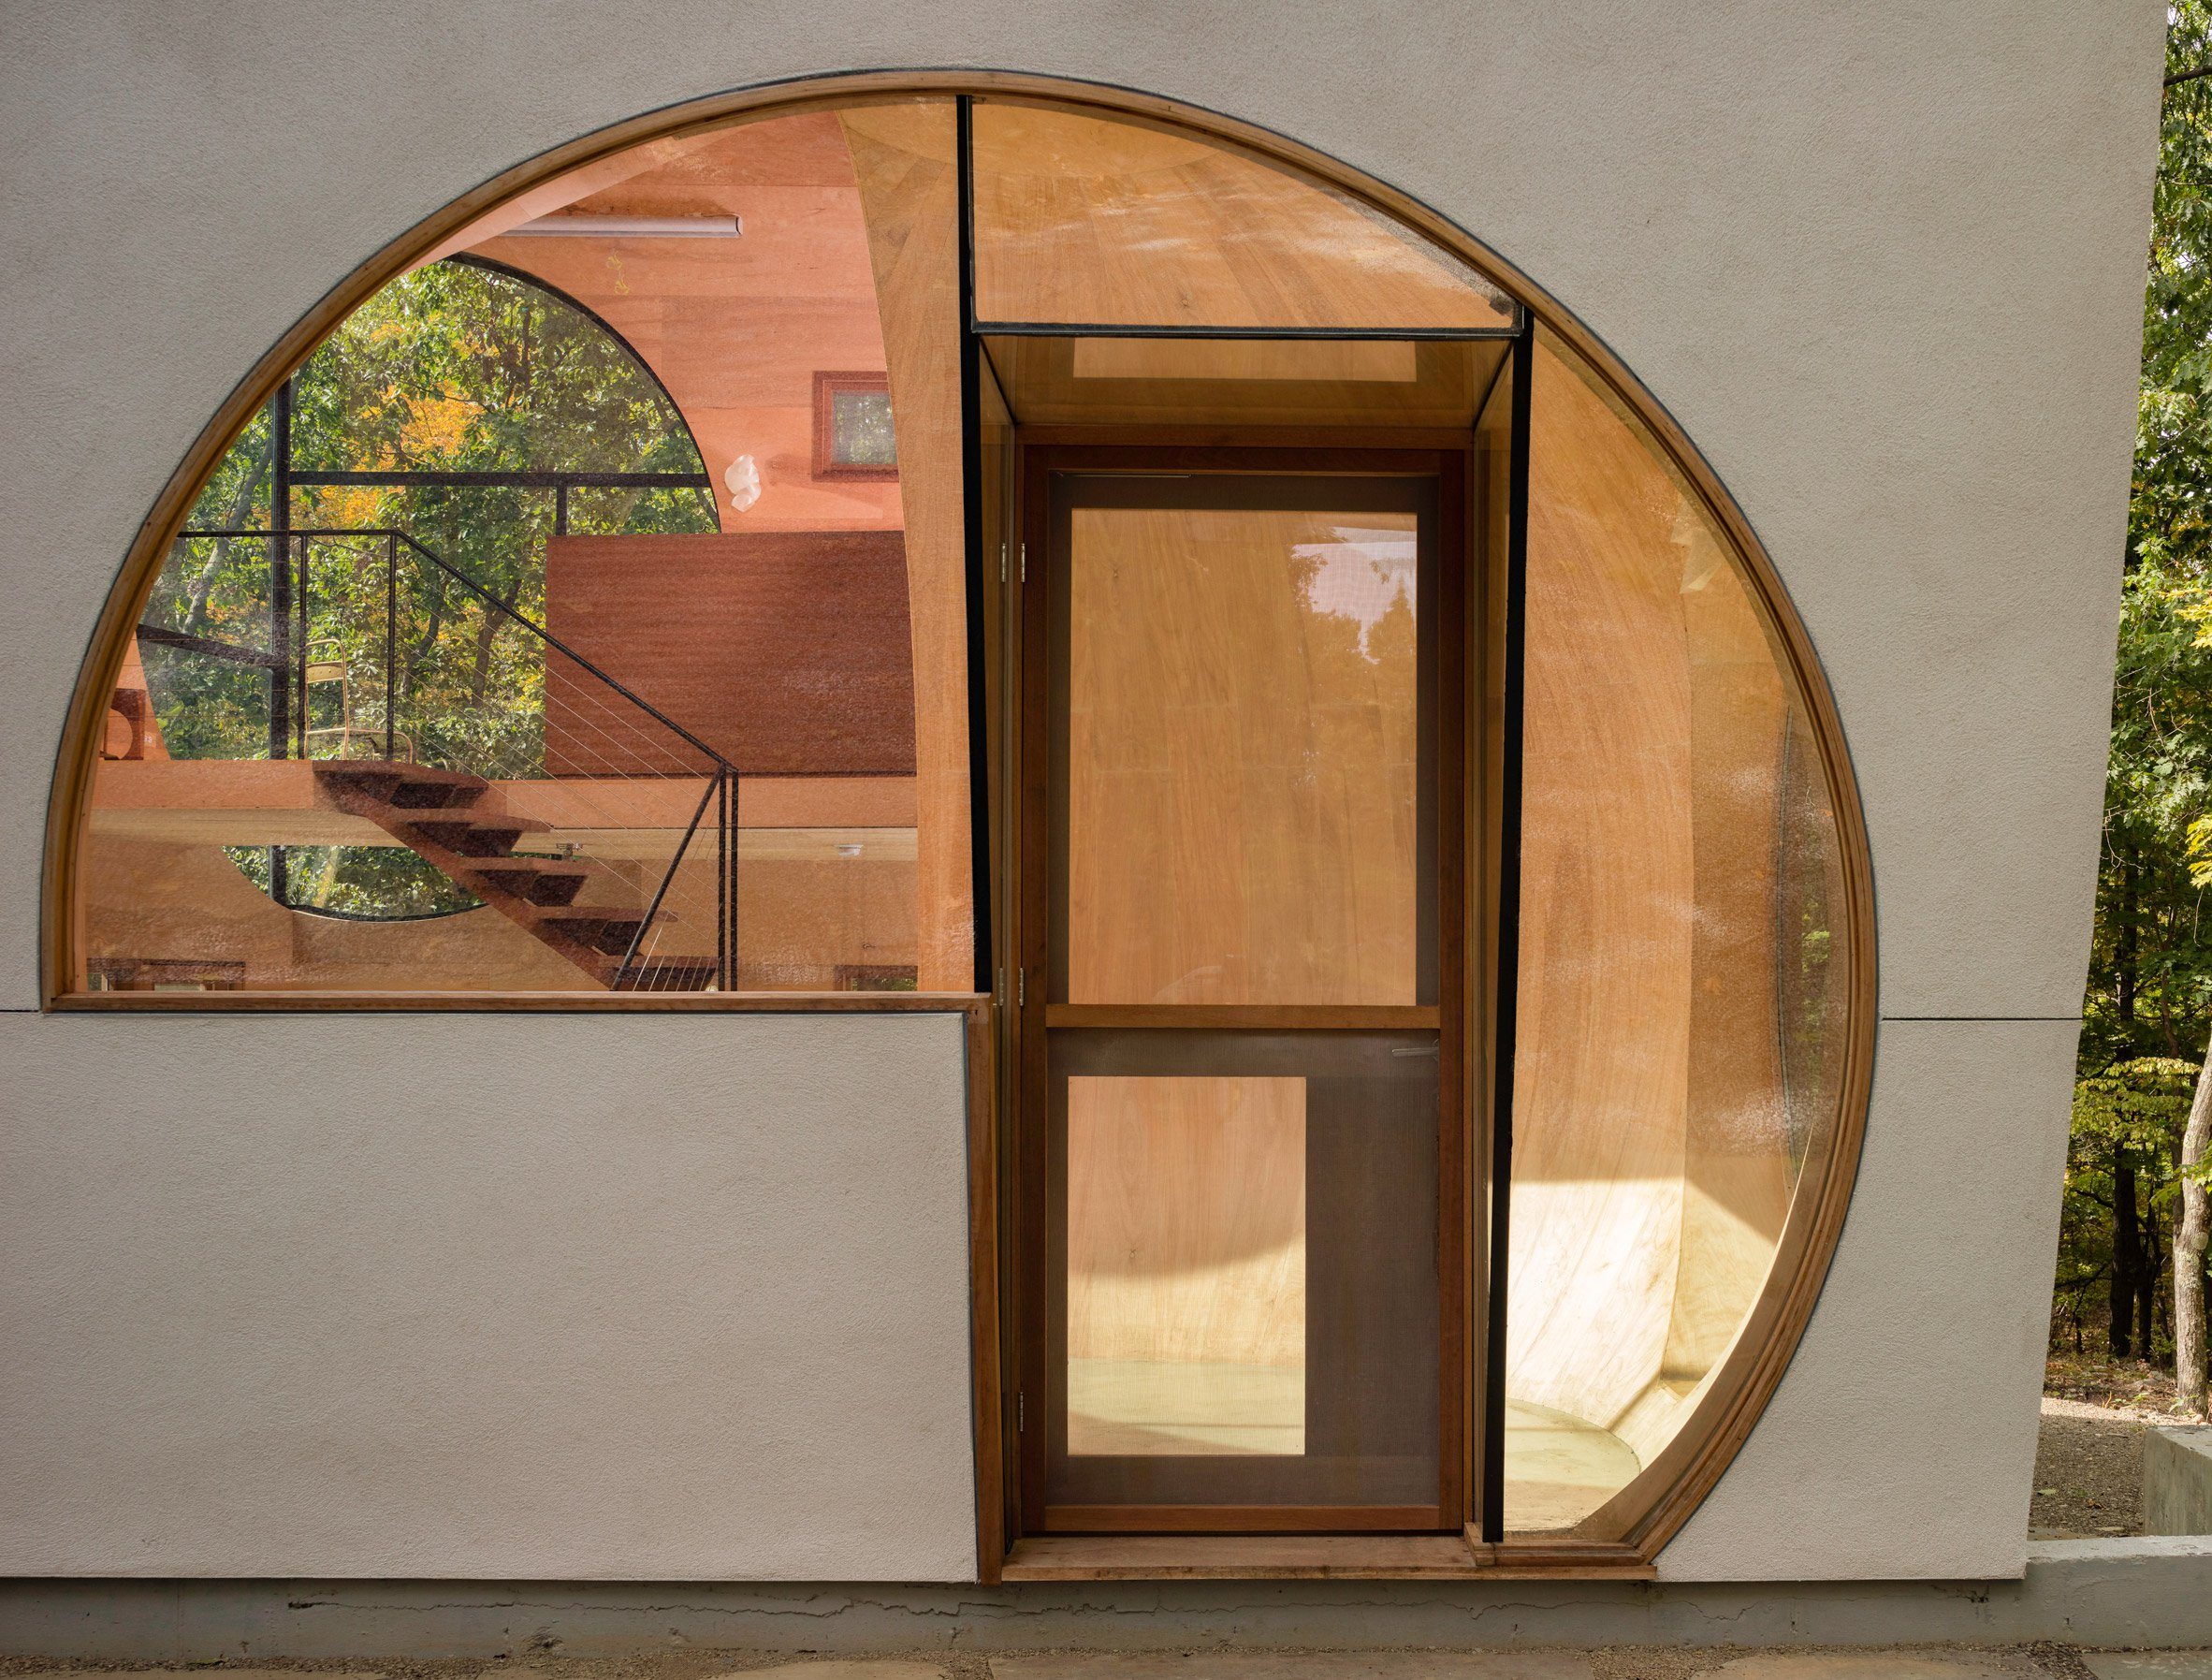 Steven Holl, Ex of In House, Rhinebeck